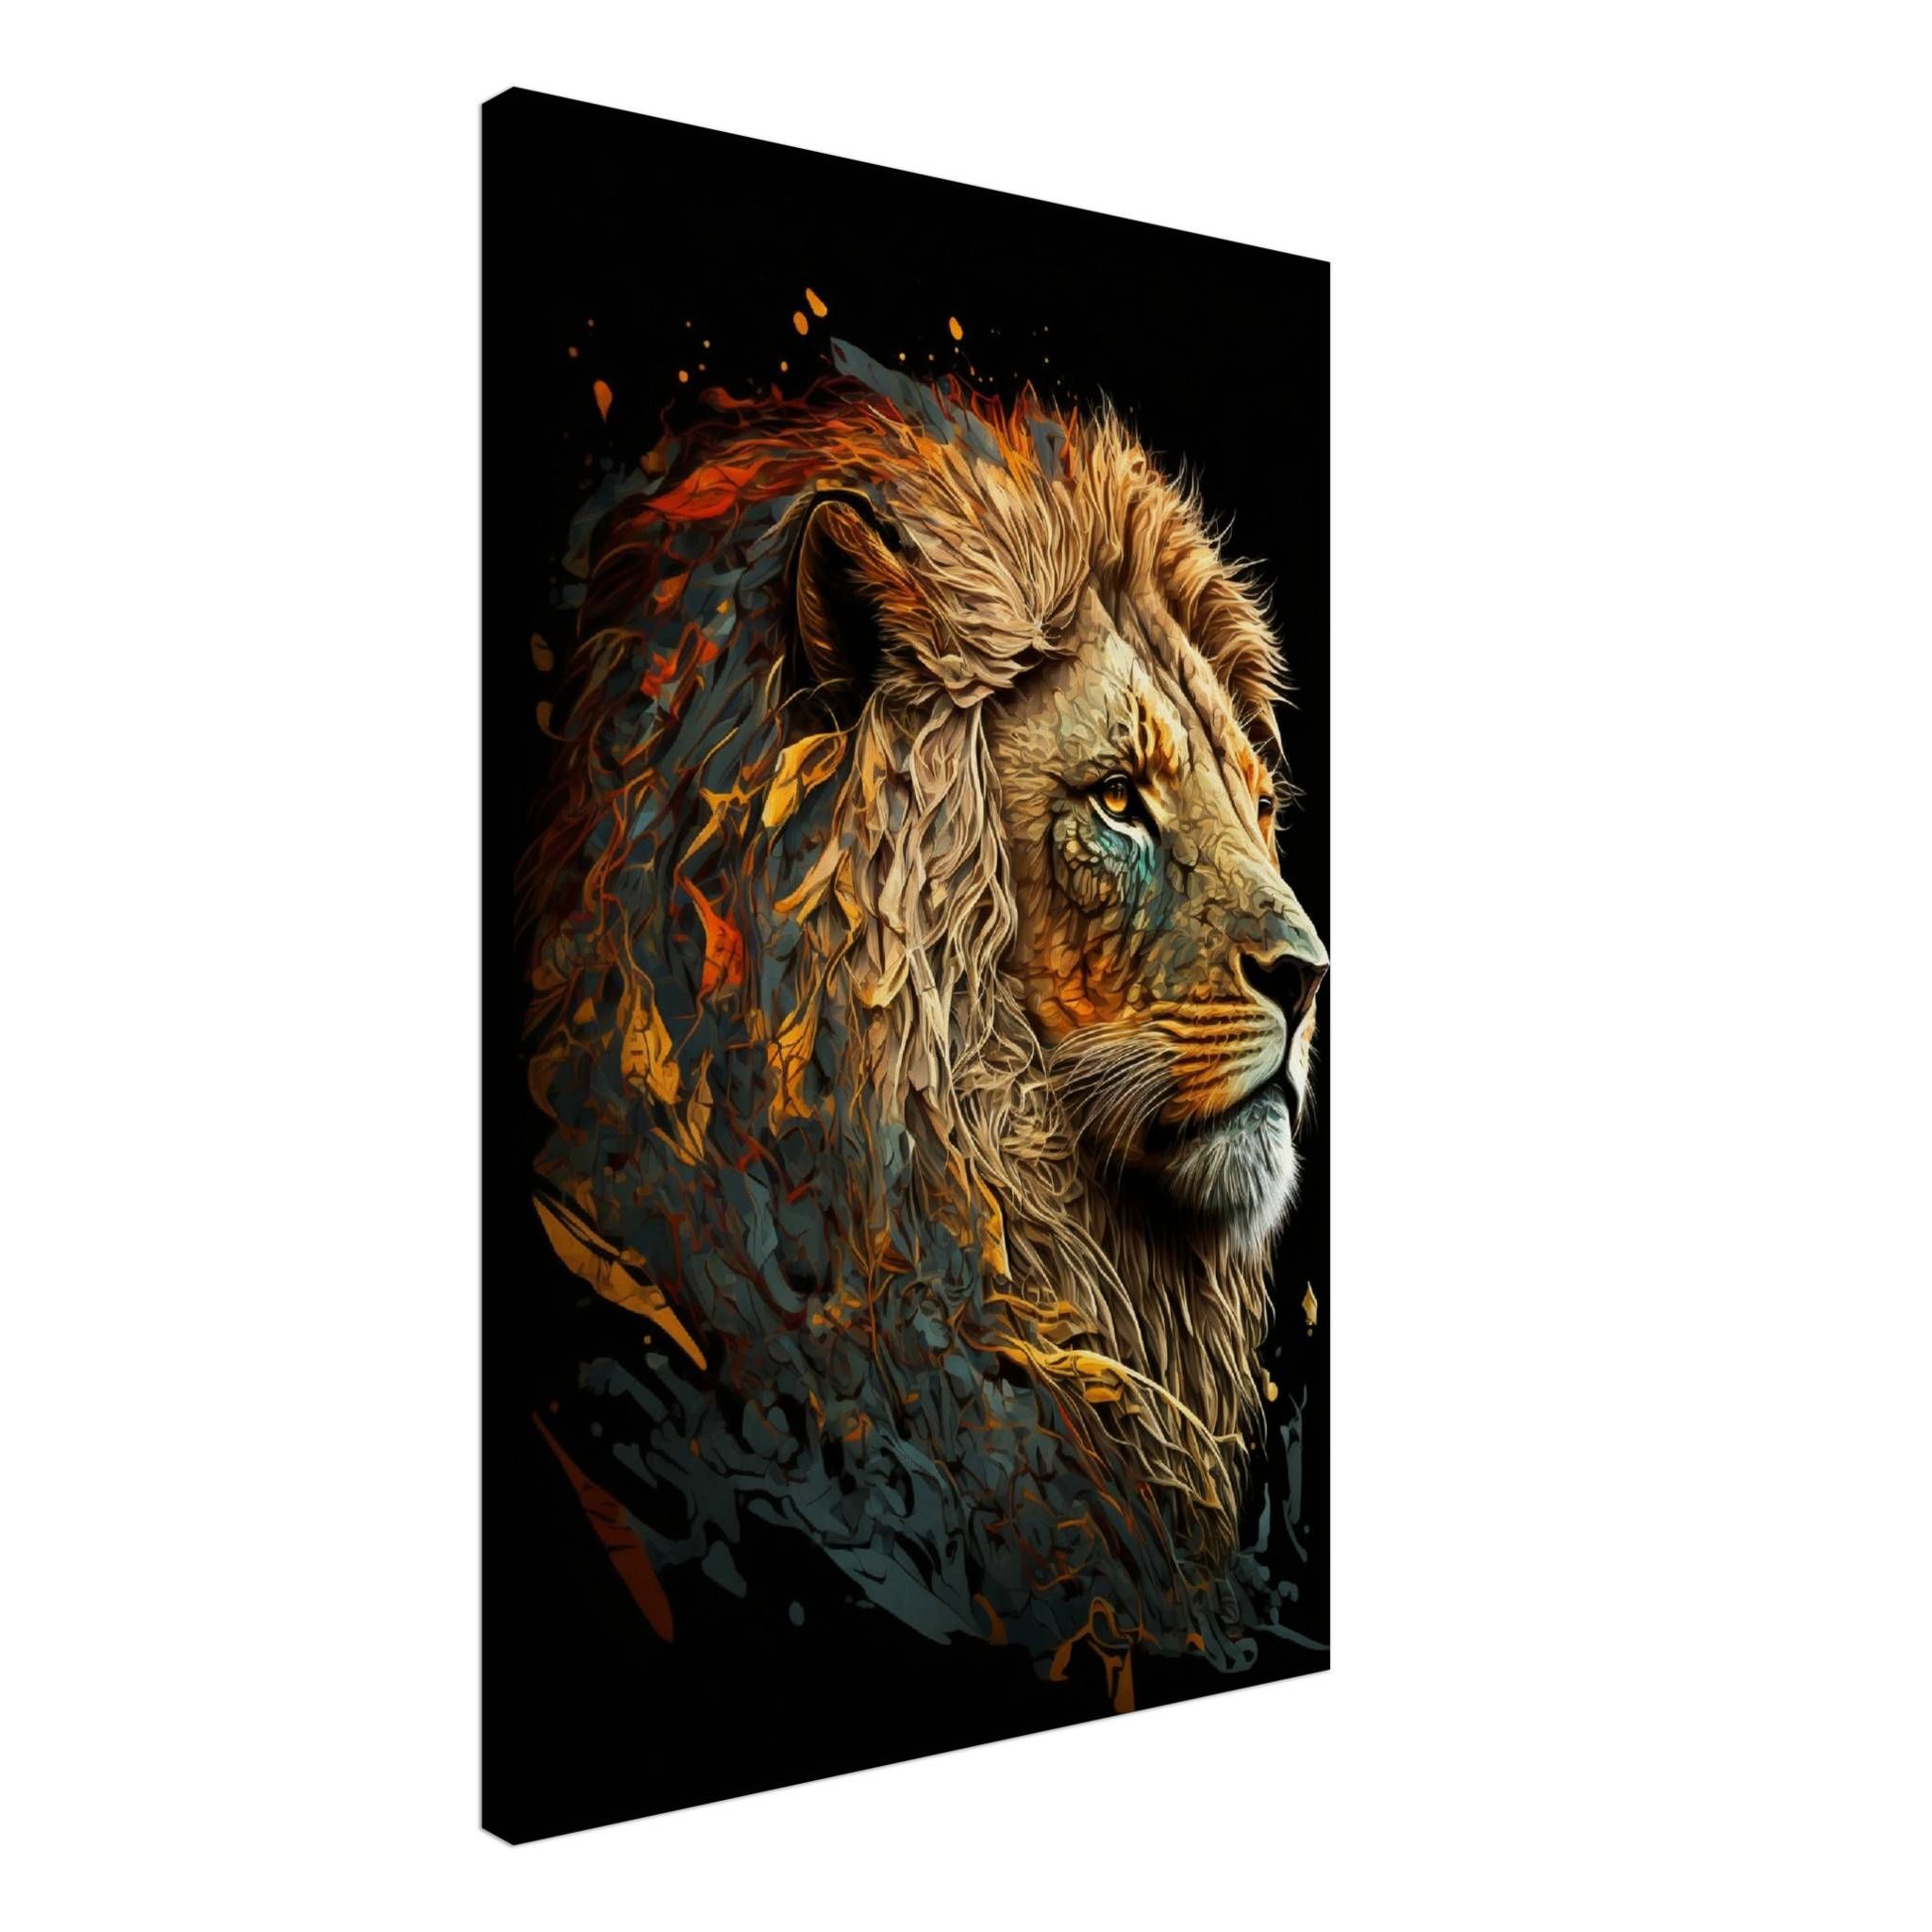 Lion Close to Reality 5 / 50 x 75 cm (Canvas Print) Canvas Print Canvas reproduction The Pianist Print On Demand Fabled Gallery https://fabledgallery.art/product/lion-close-to-reality-5-50-x-75-cm-canvas-print/